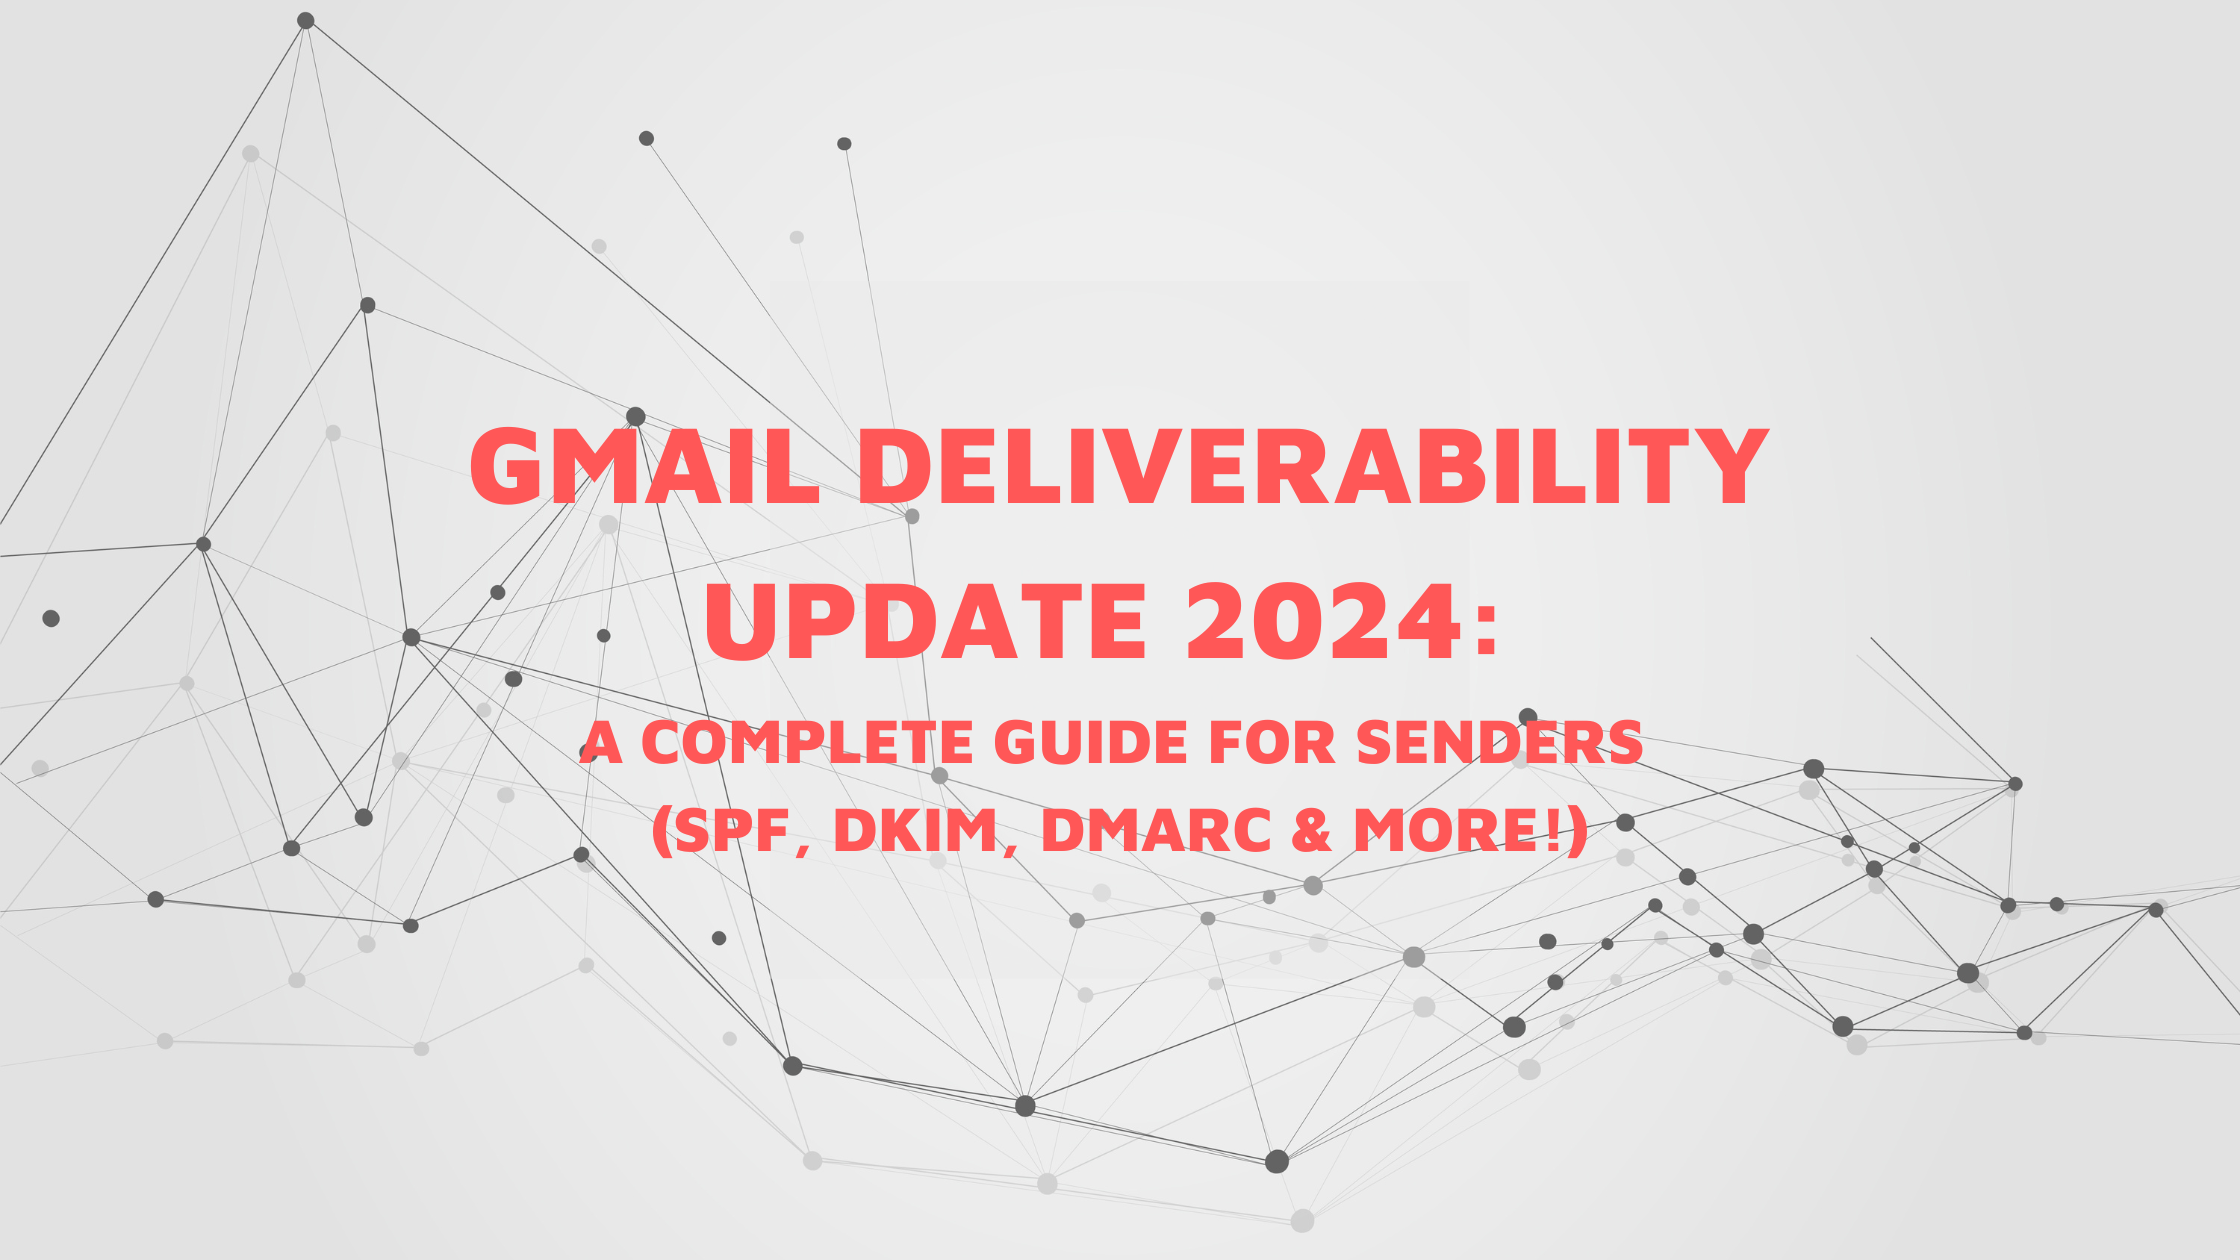 Gmail Deliverability Update 2024 A Complete Guide for Senders (SPF, DKIM, DMARC & More!)